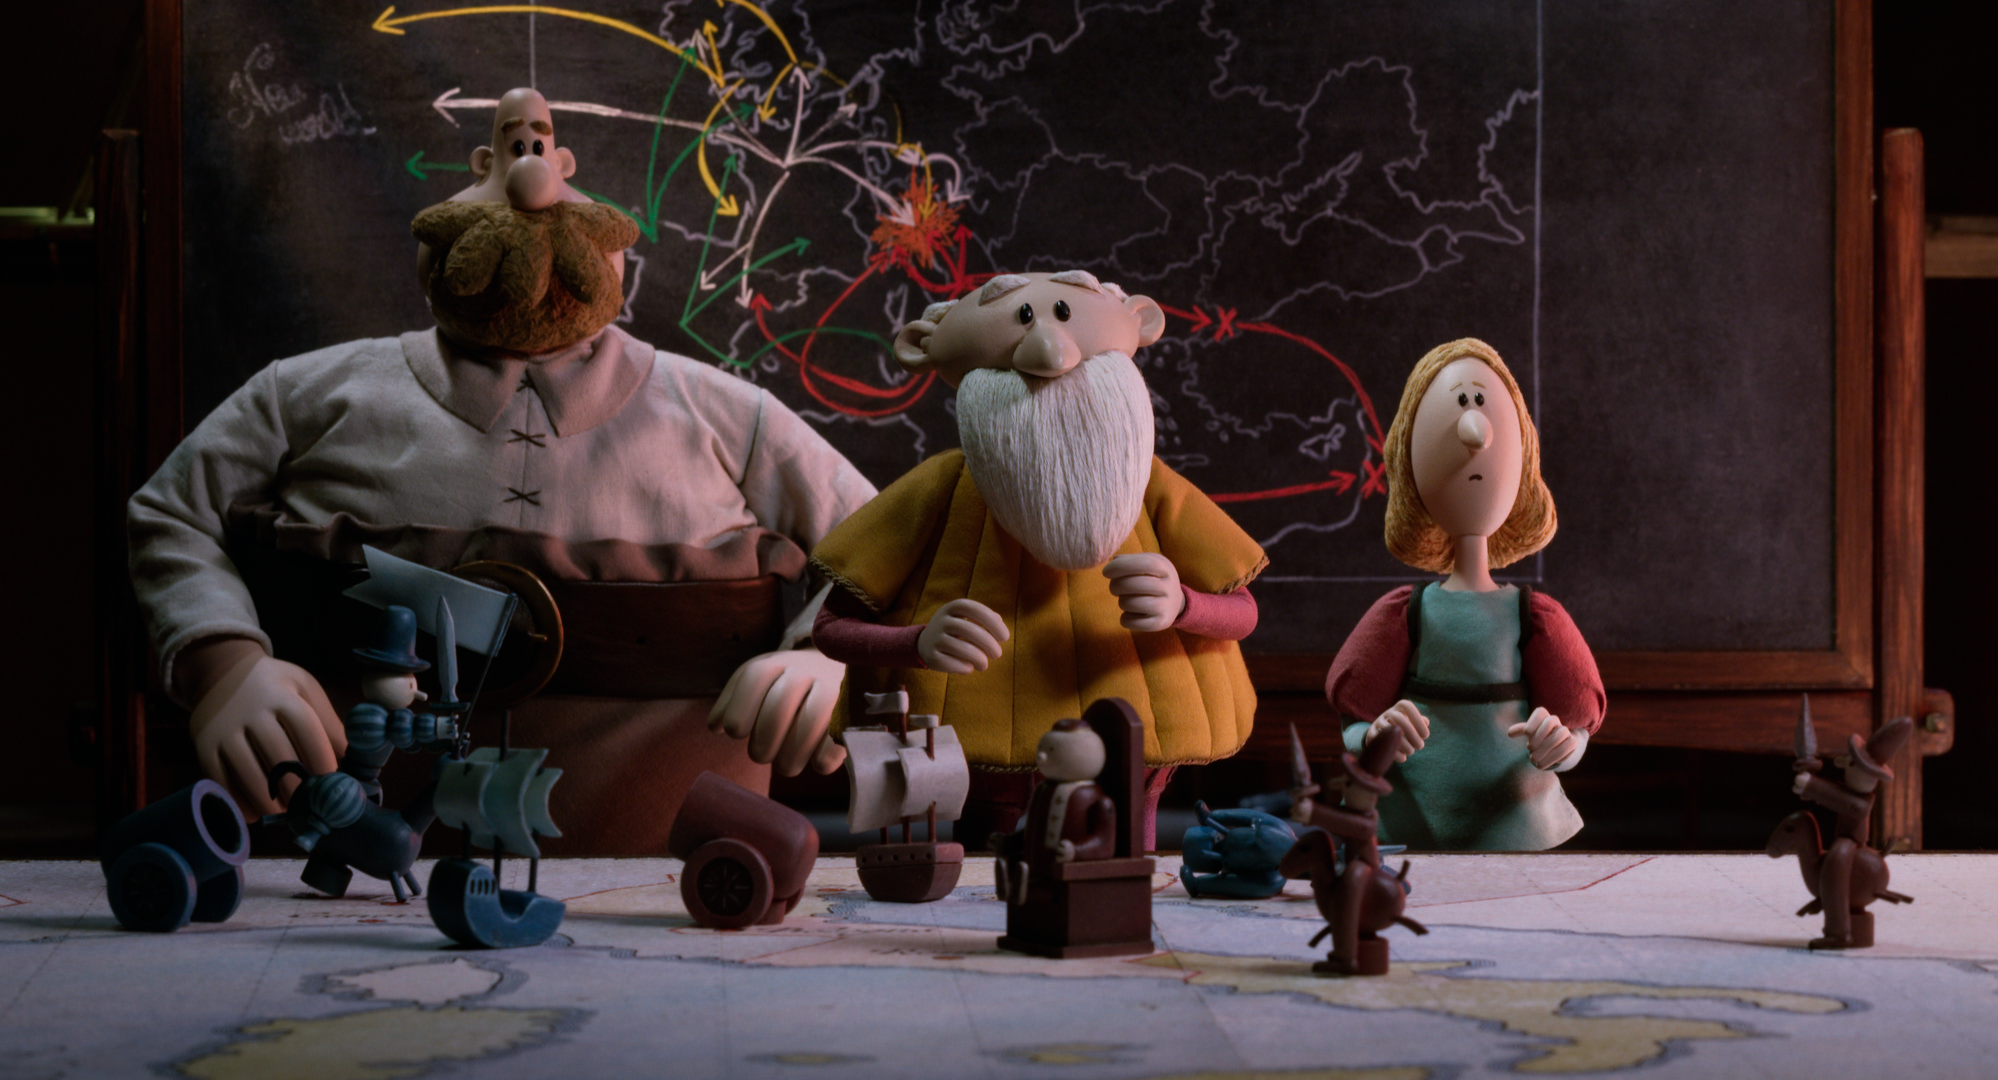 Three clay dolls standing in front of a large map speckled with coloured arrows. On a table in front of them are small figurines including pirate ships, individuals riding on horses, a cannon, and a person sitting on a wooden throne-like chair.